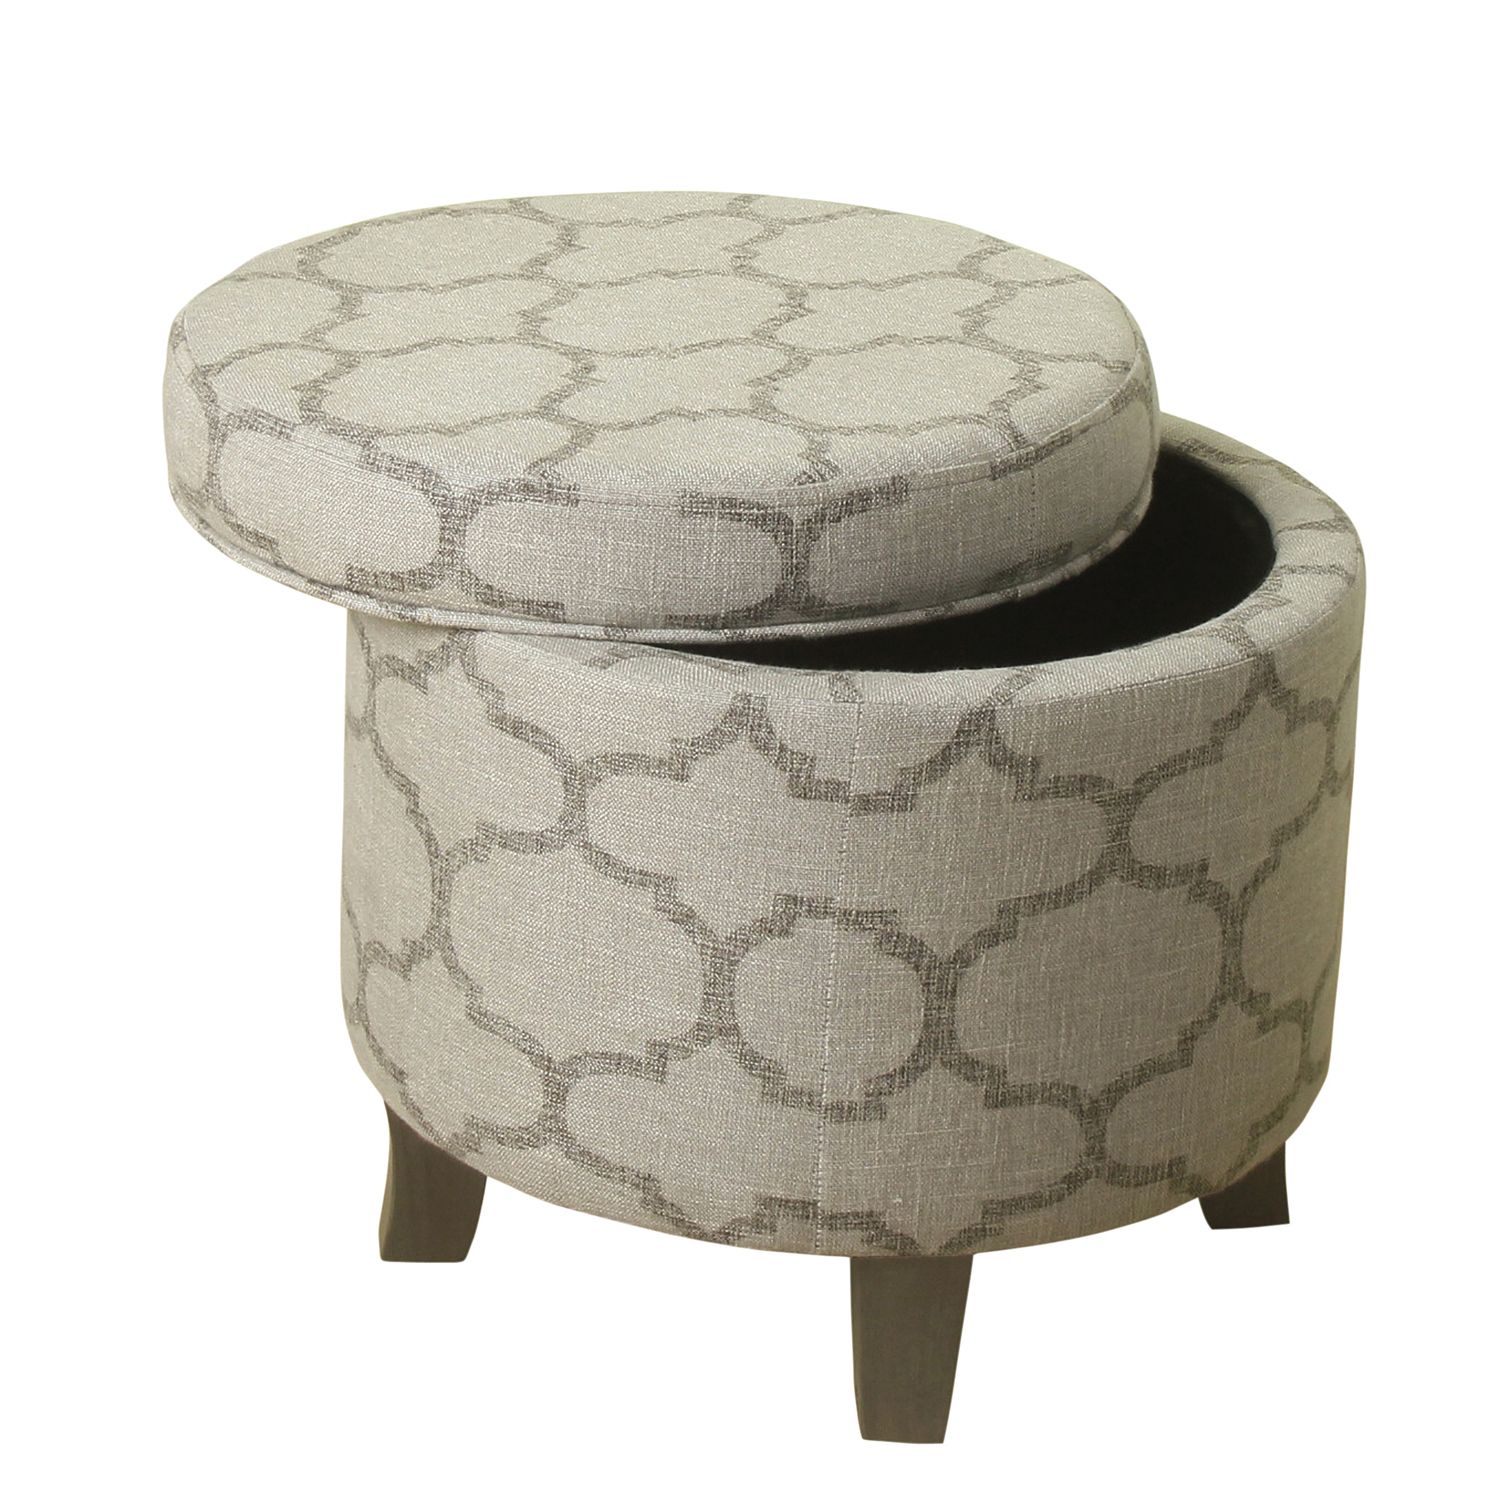 Most Recently Released Round Cream Tasseled Ottomans Pertaining To Classic Gray Quatrefoil Round Storage Ottoman – Pier (View 6 of 10)